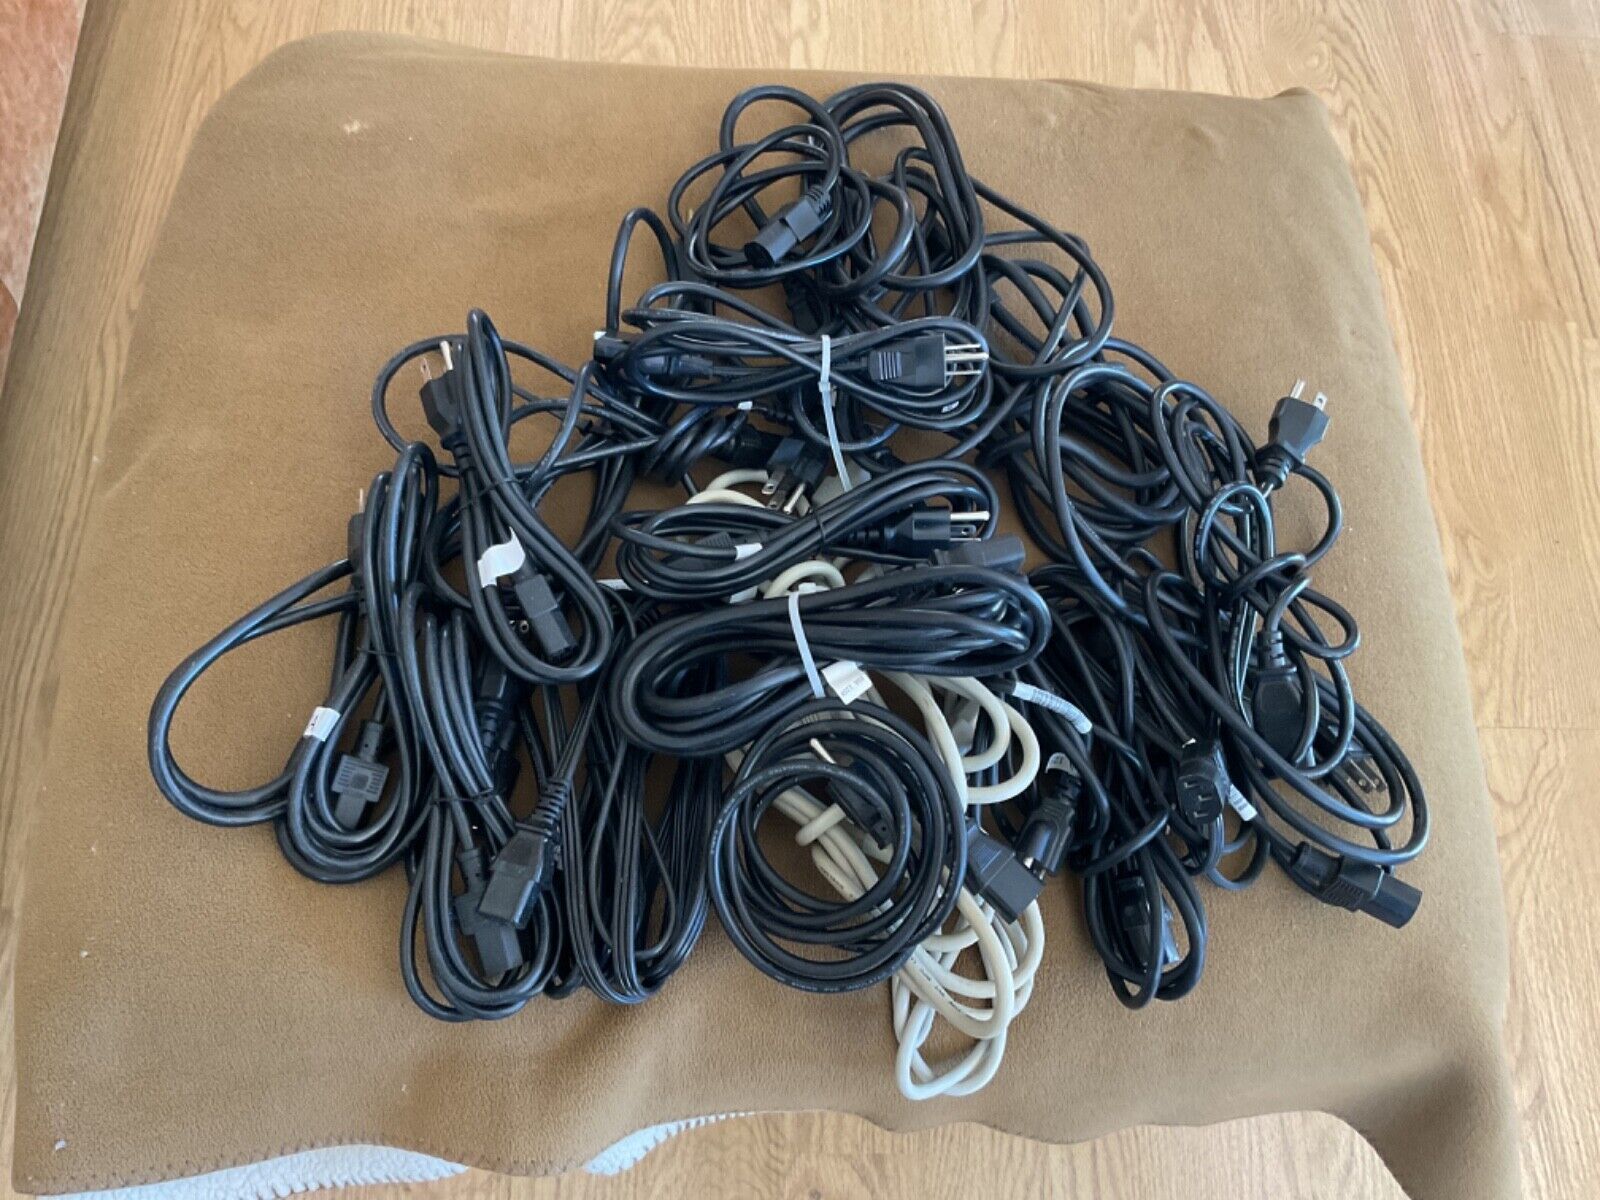 Lot of 25 Power Cables 6FT PC/Computer/Printer Power Cords. Good Condition.